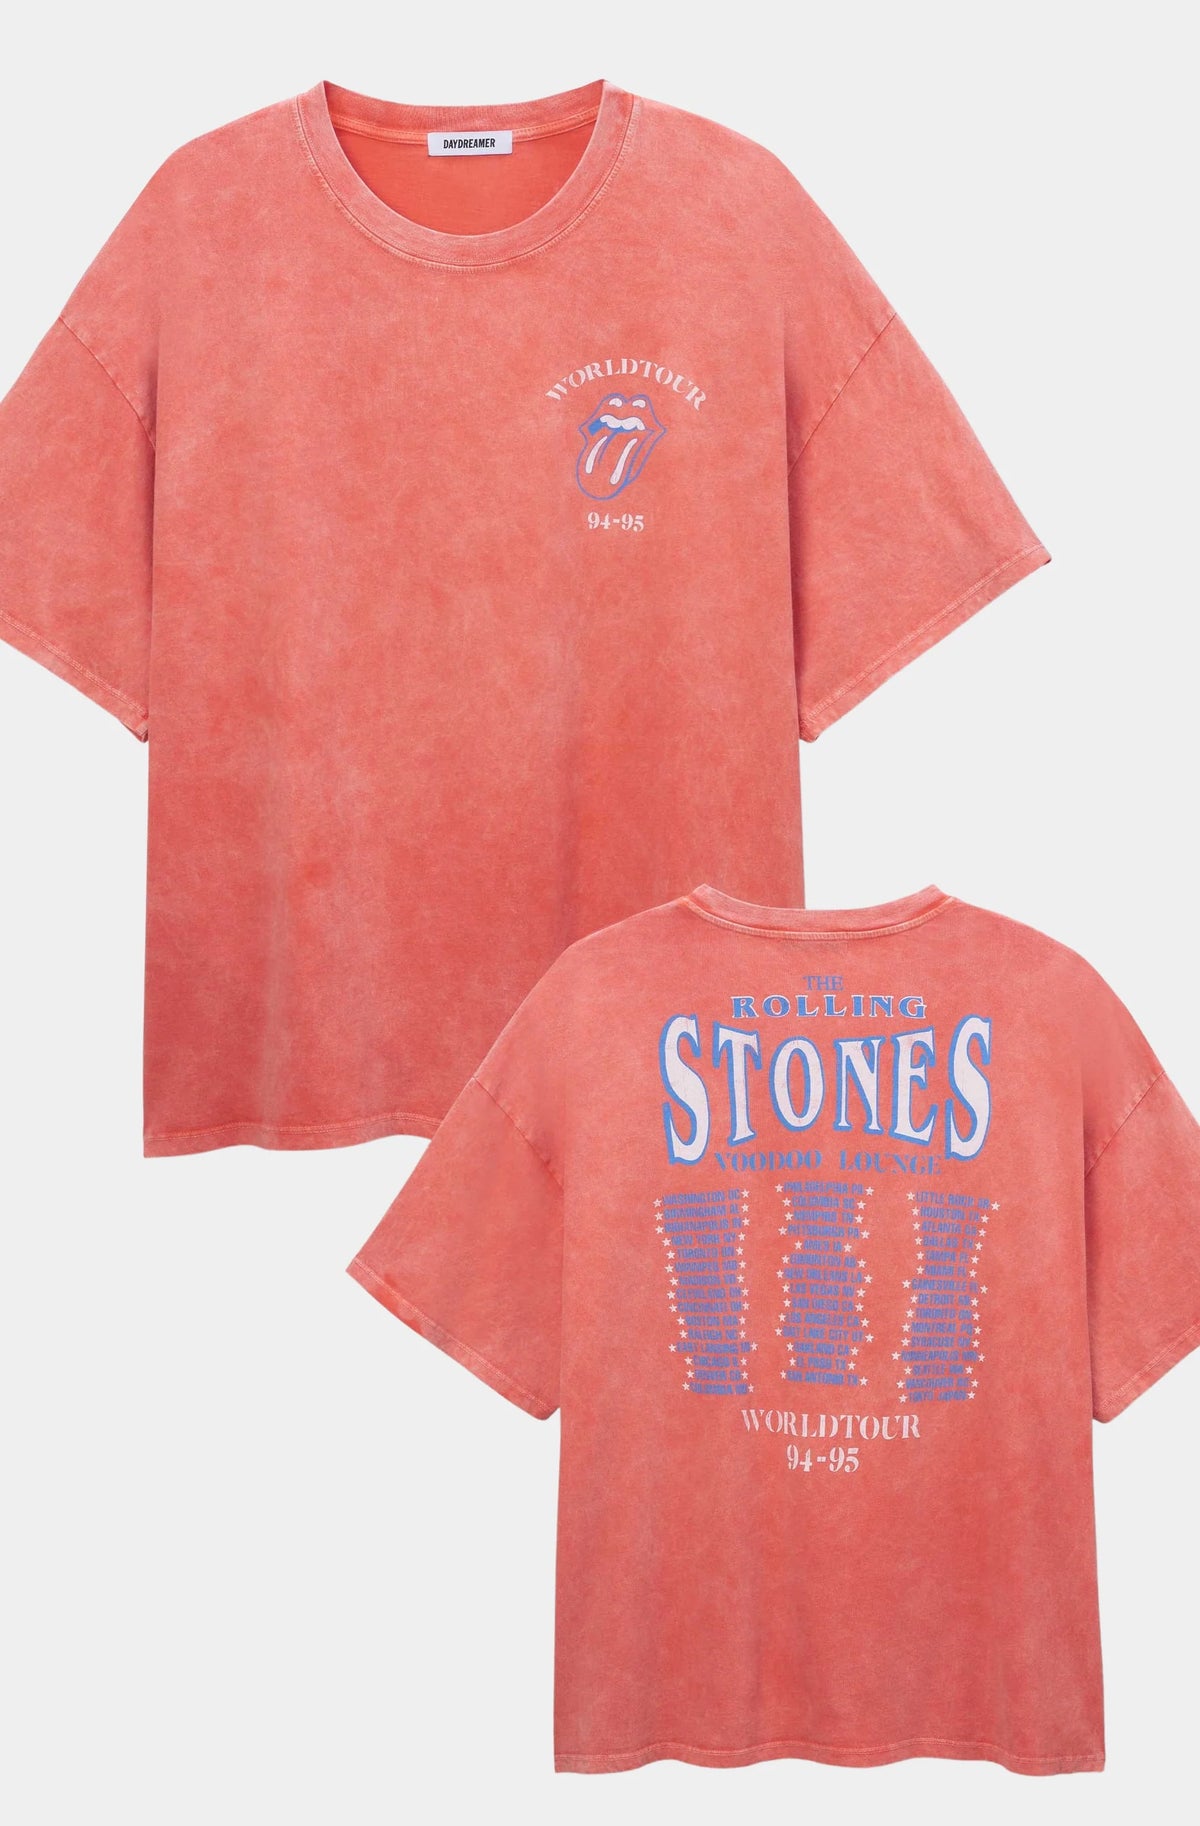 Daydreamer Rolling Stones World Tour 94-95 Tee